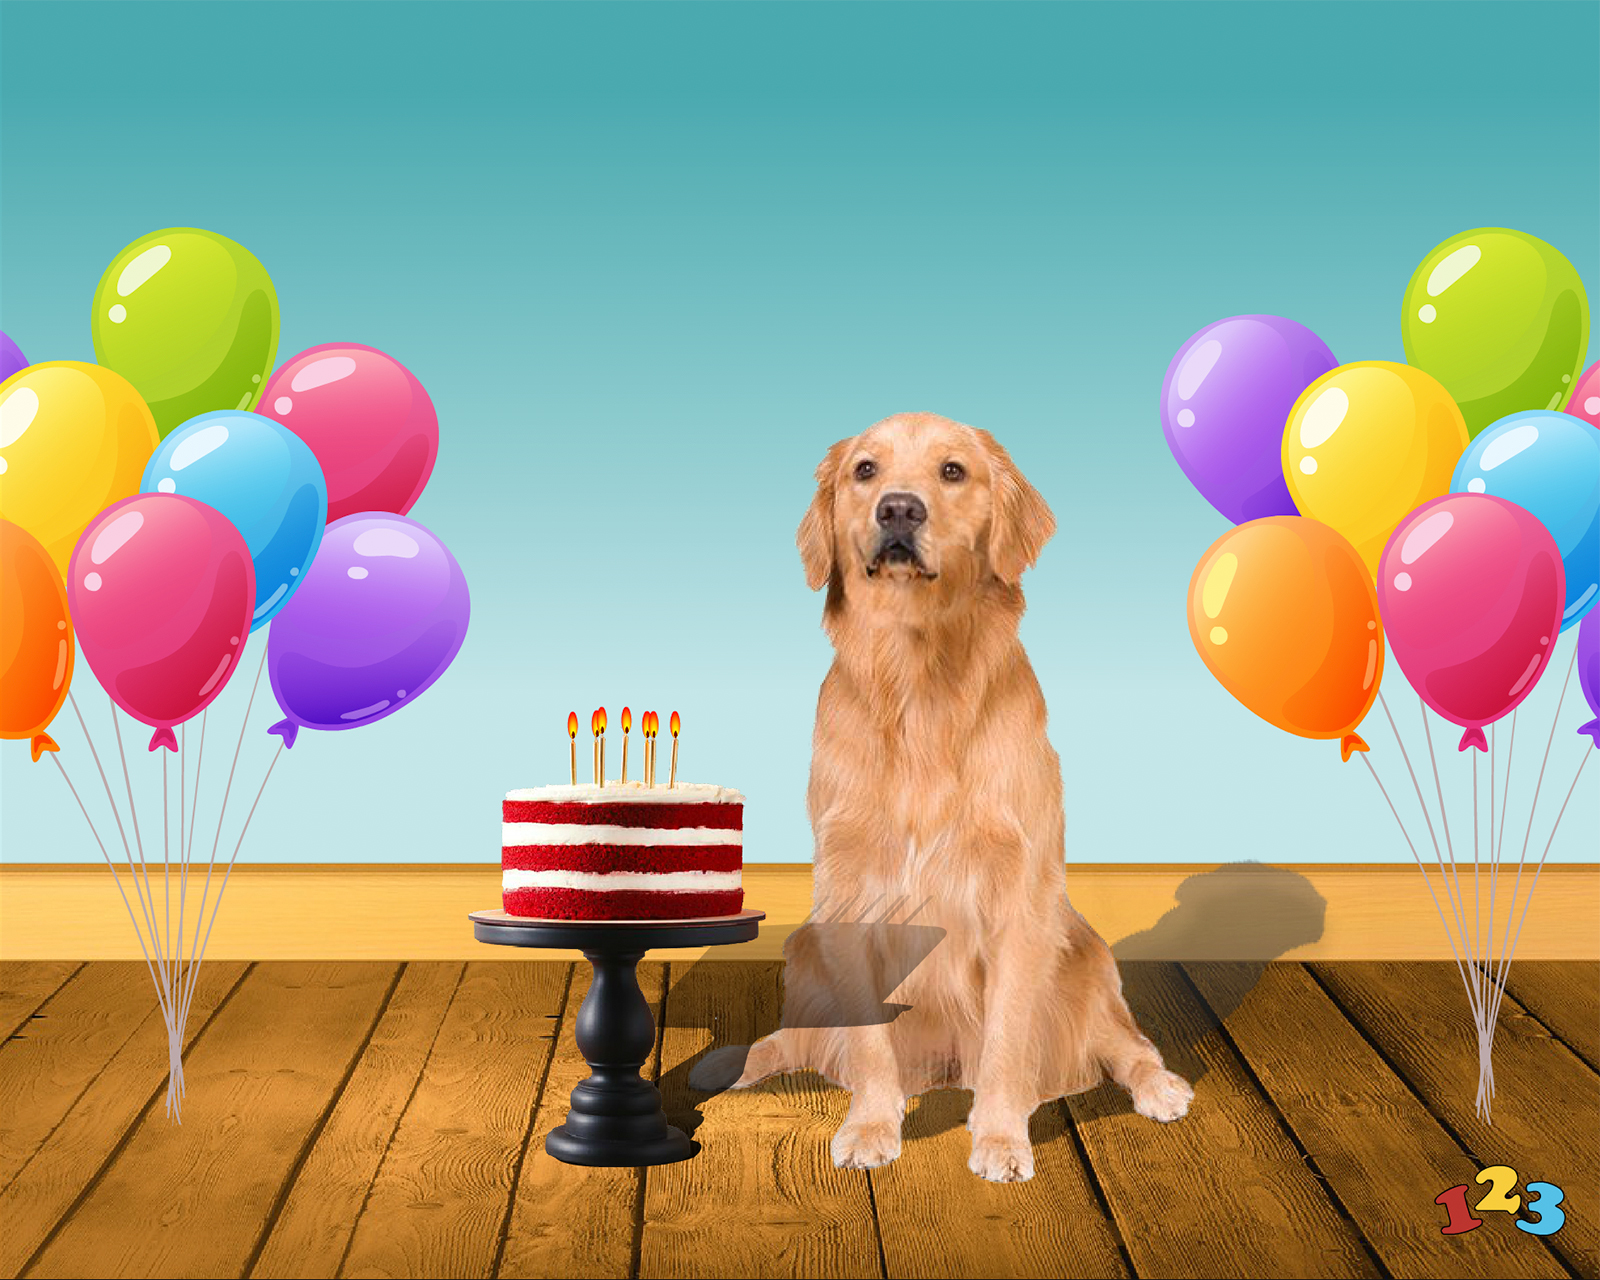 woofy-greetings-birthday-send-free-ecards-from-123cards